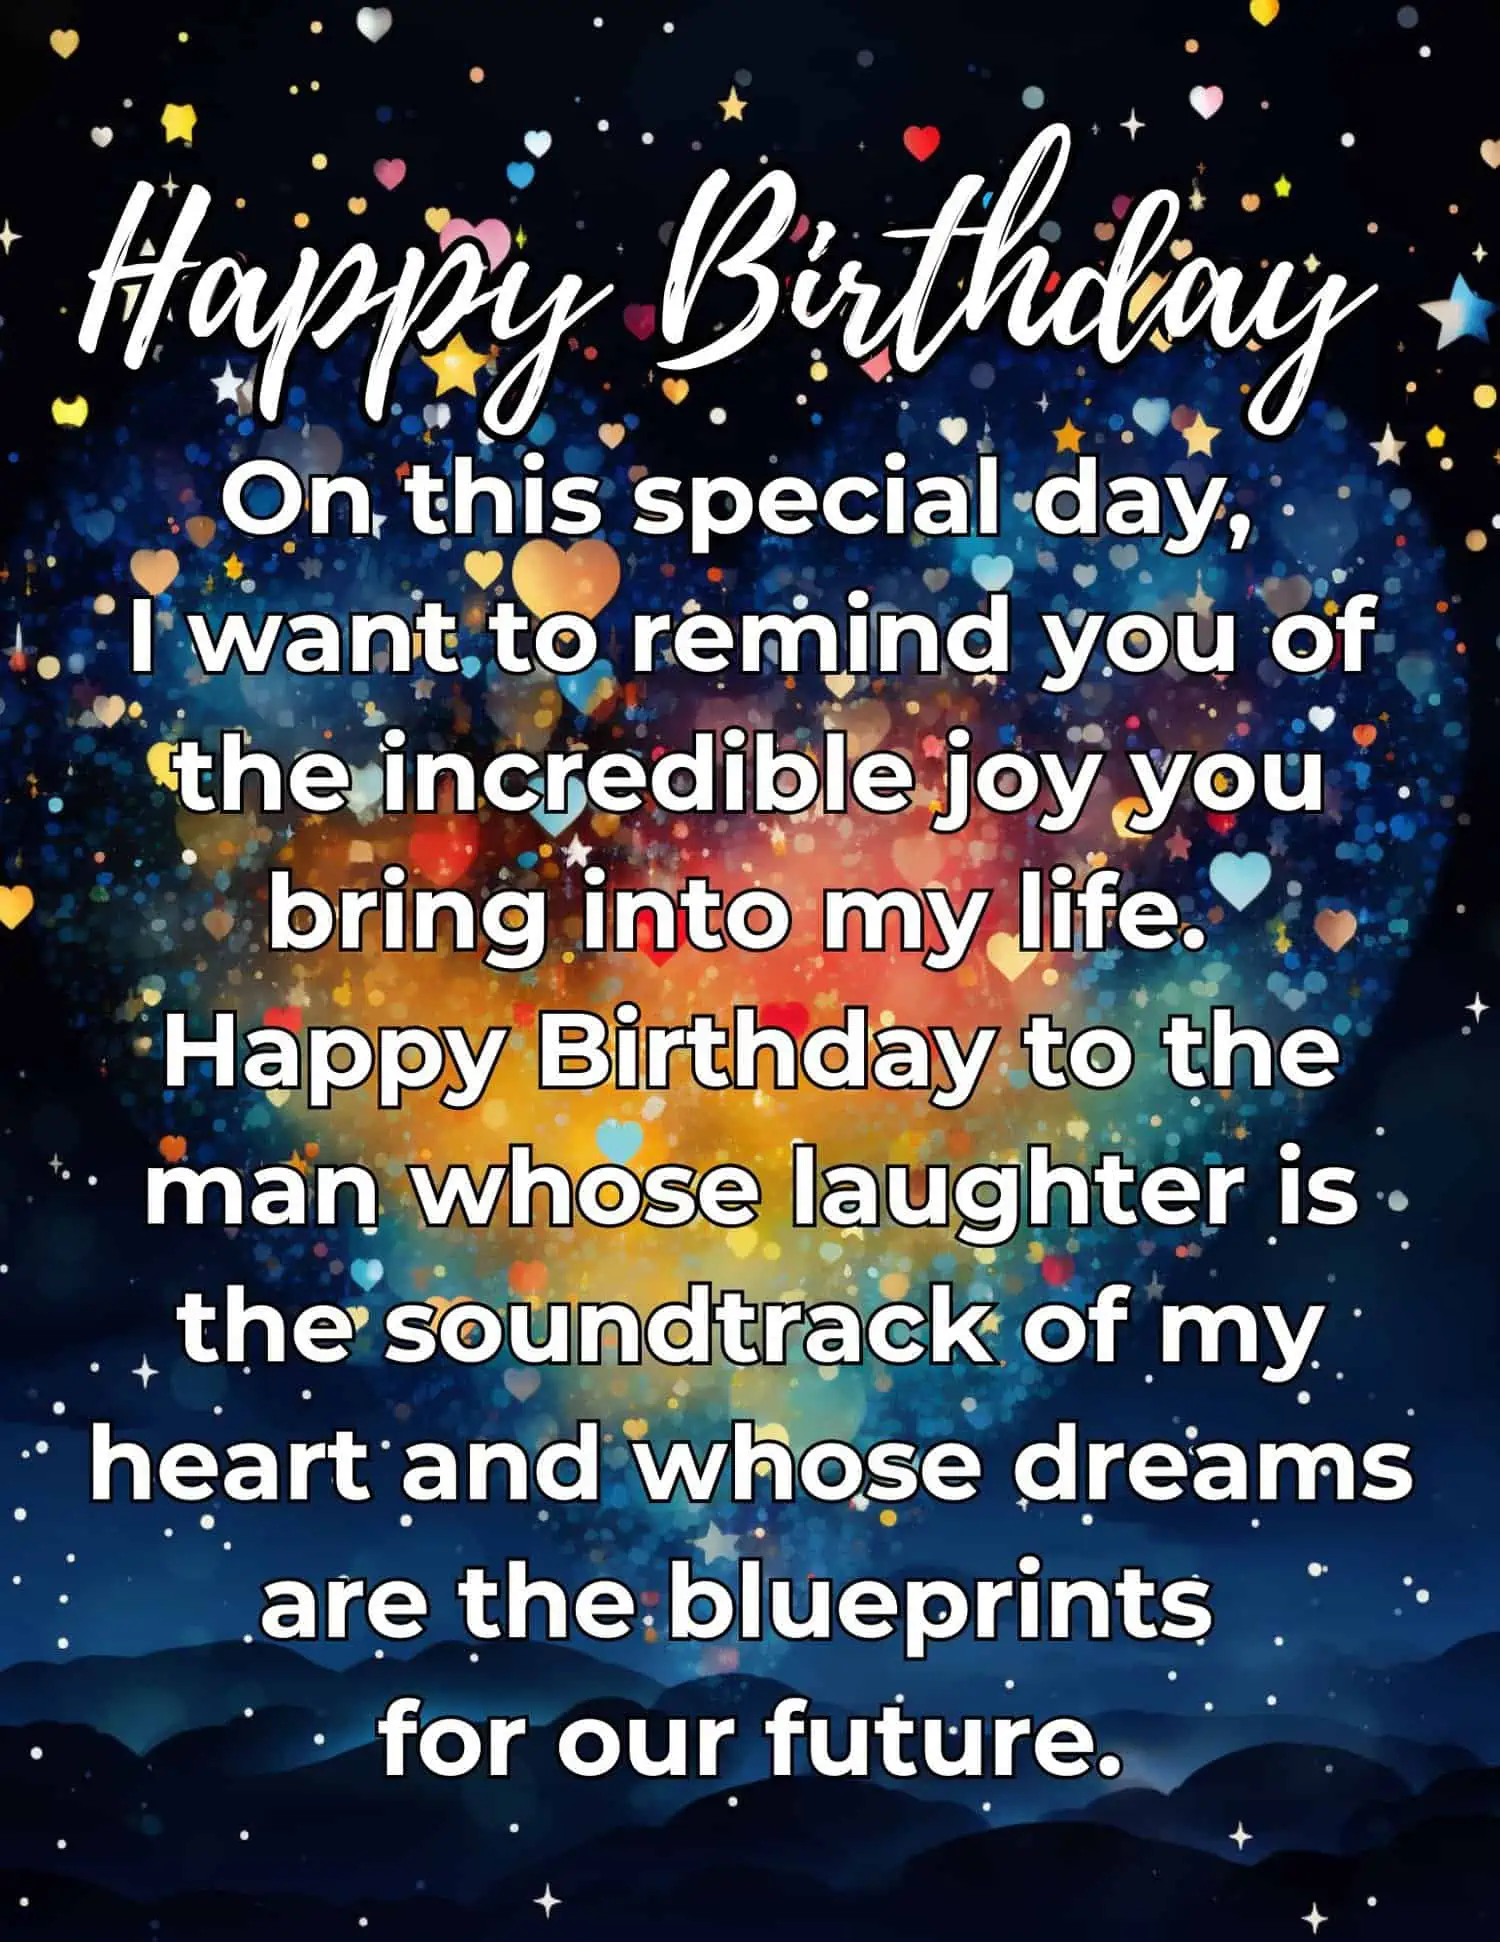 A collection of long, emotional birthday wishes that eloquently express profound love and affection for a boyfriend, tailored to touch his heart deeply on his birthday.